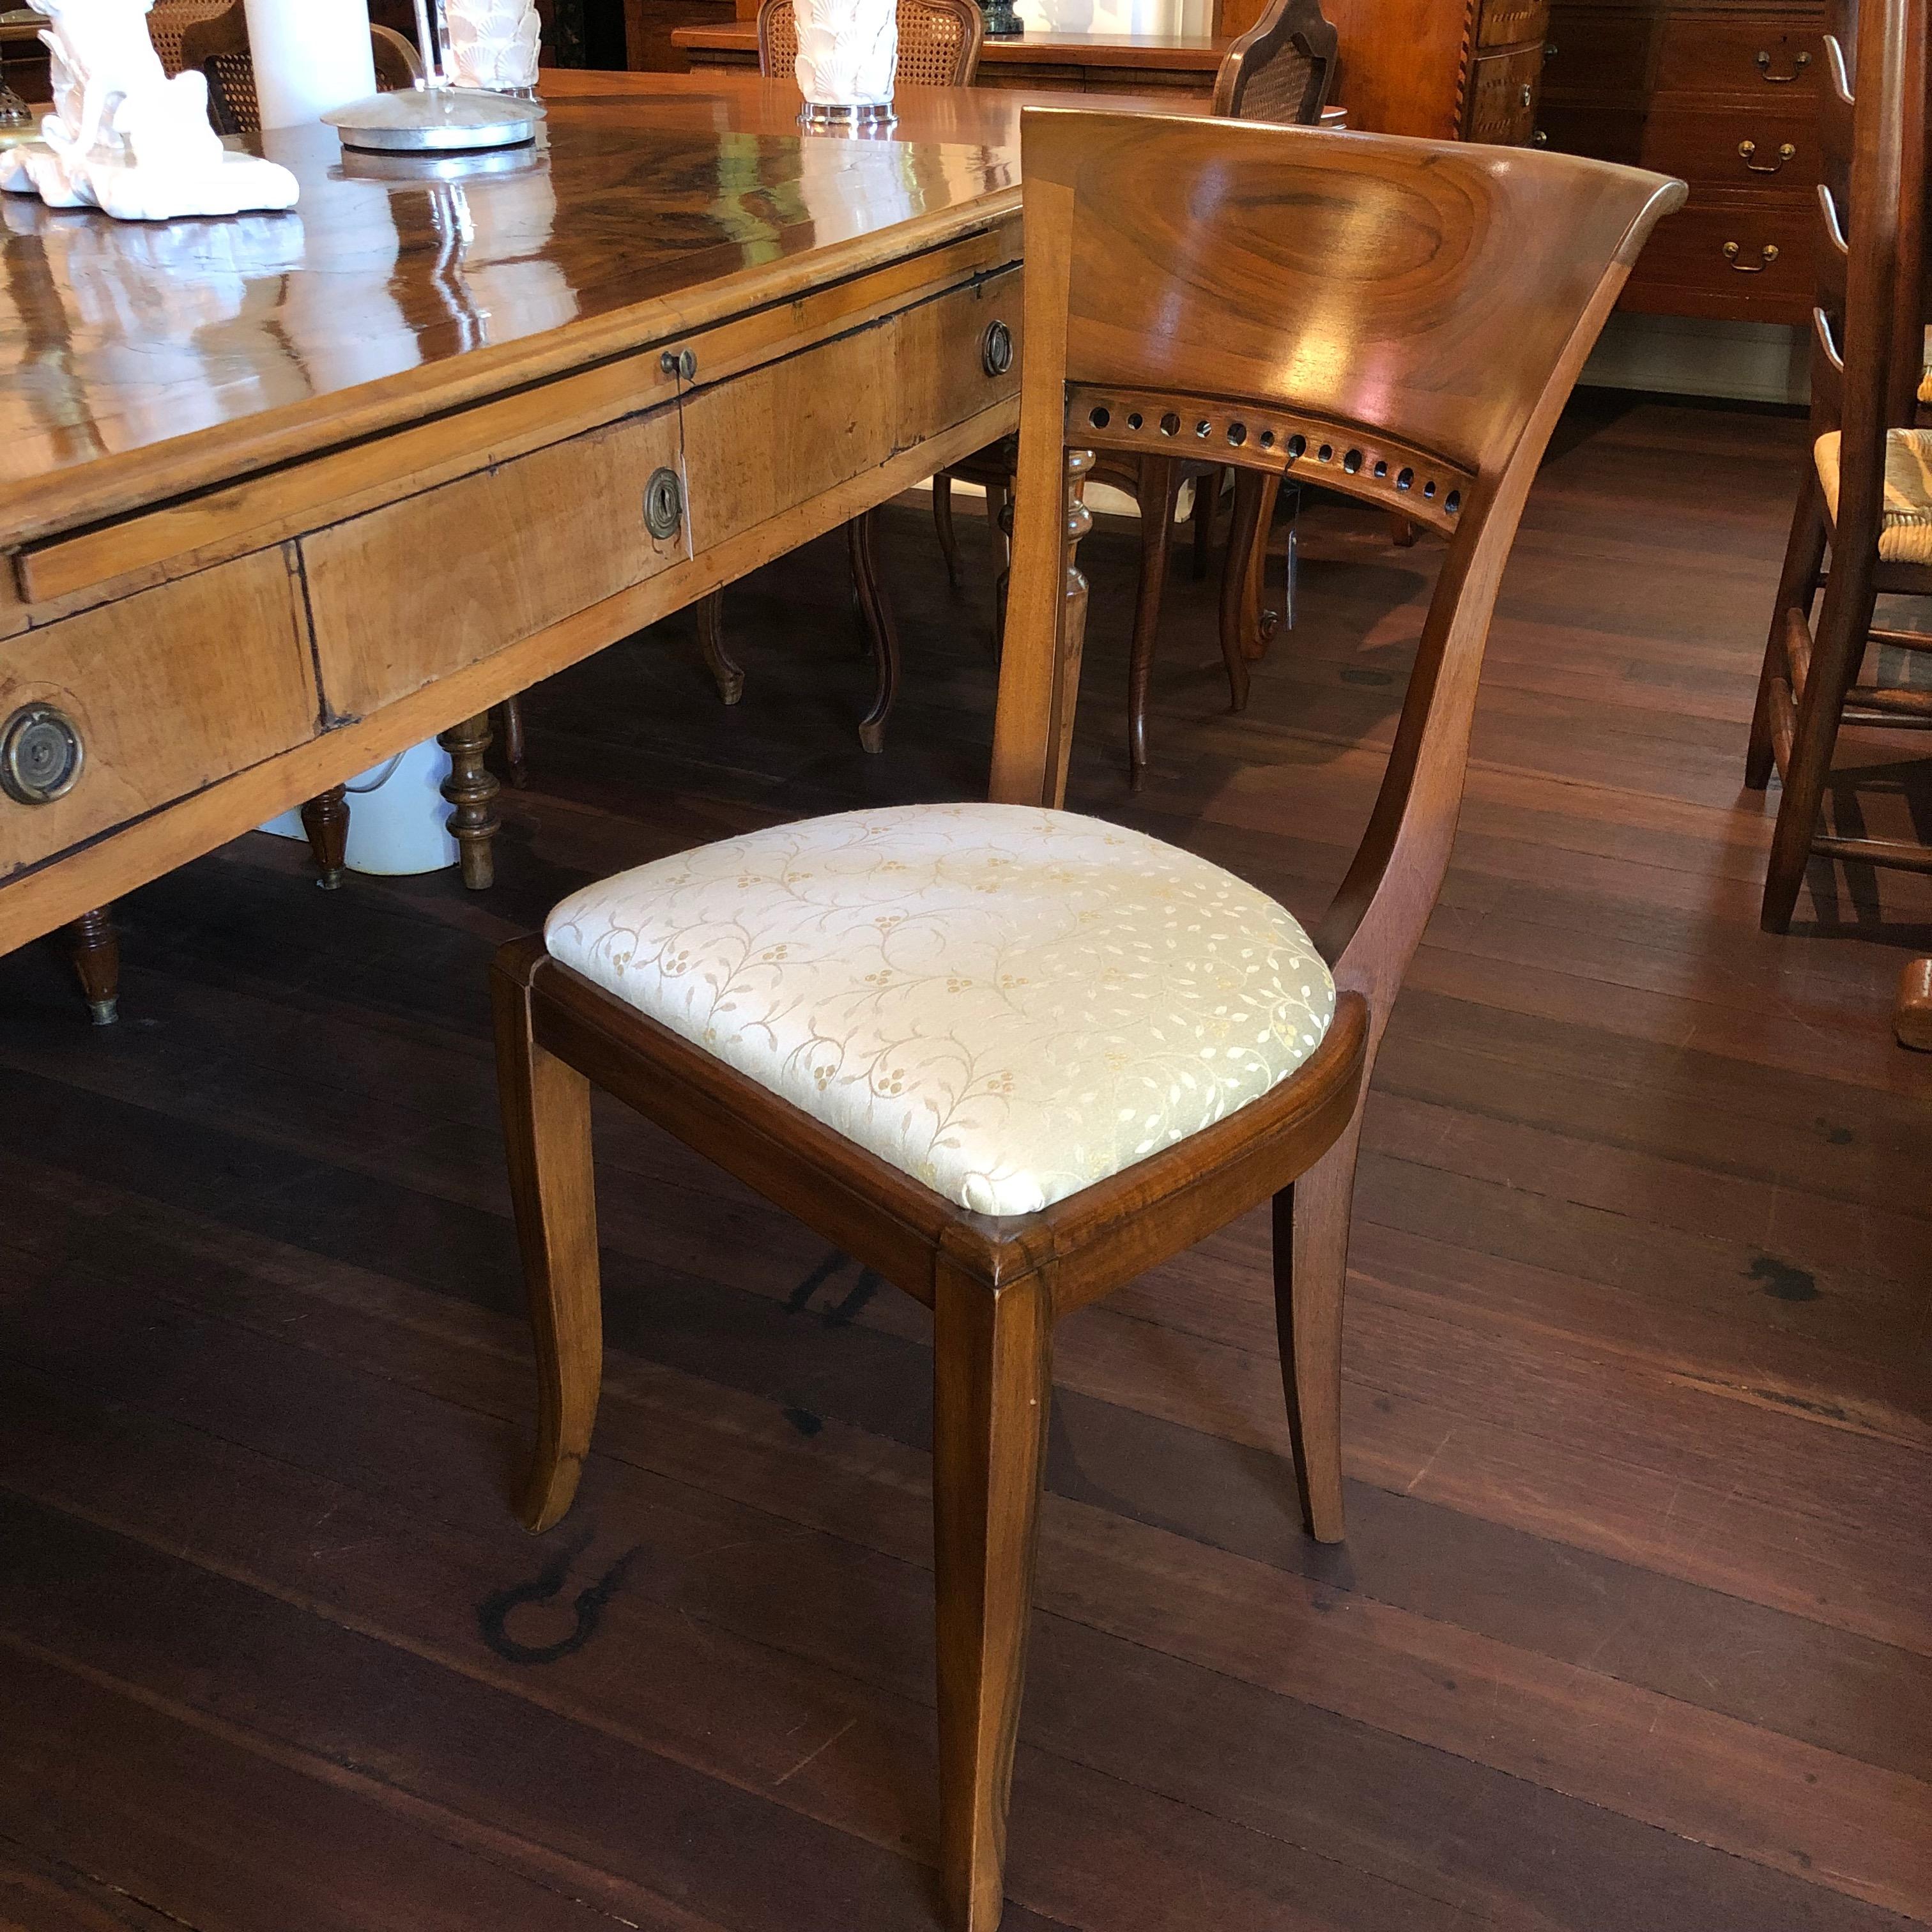 This beautiful circa 1920 occasional chair was found in Italy and has been crafted from Italian walnut and reupholstered with luxurious, ivory silk at a letter date. Slightly curved legs and back-bones lead up to a spectacular deco styled abstract